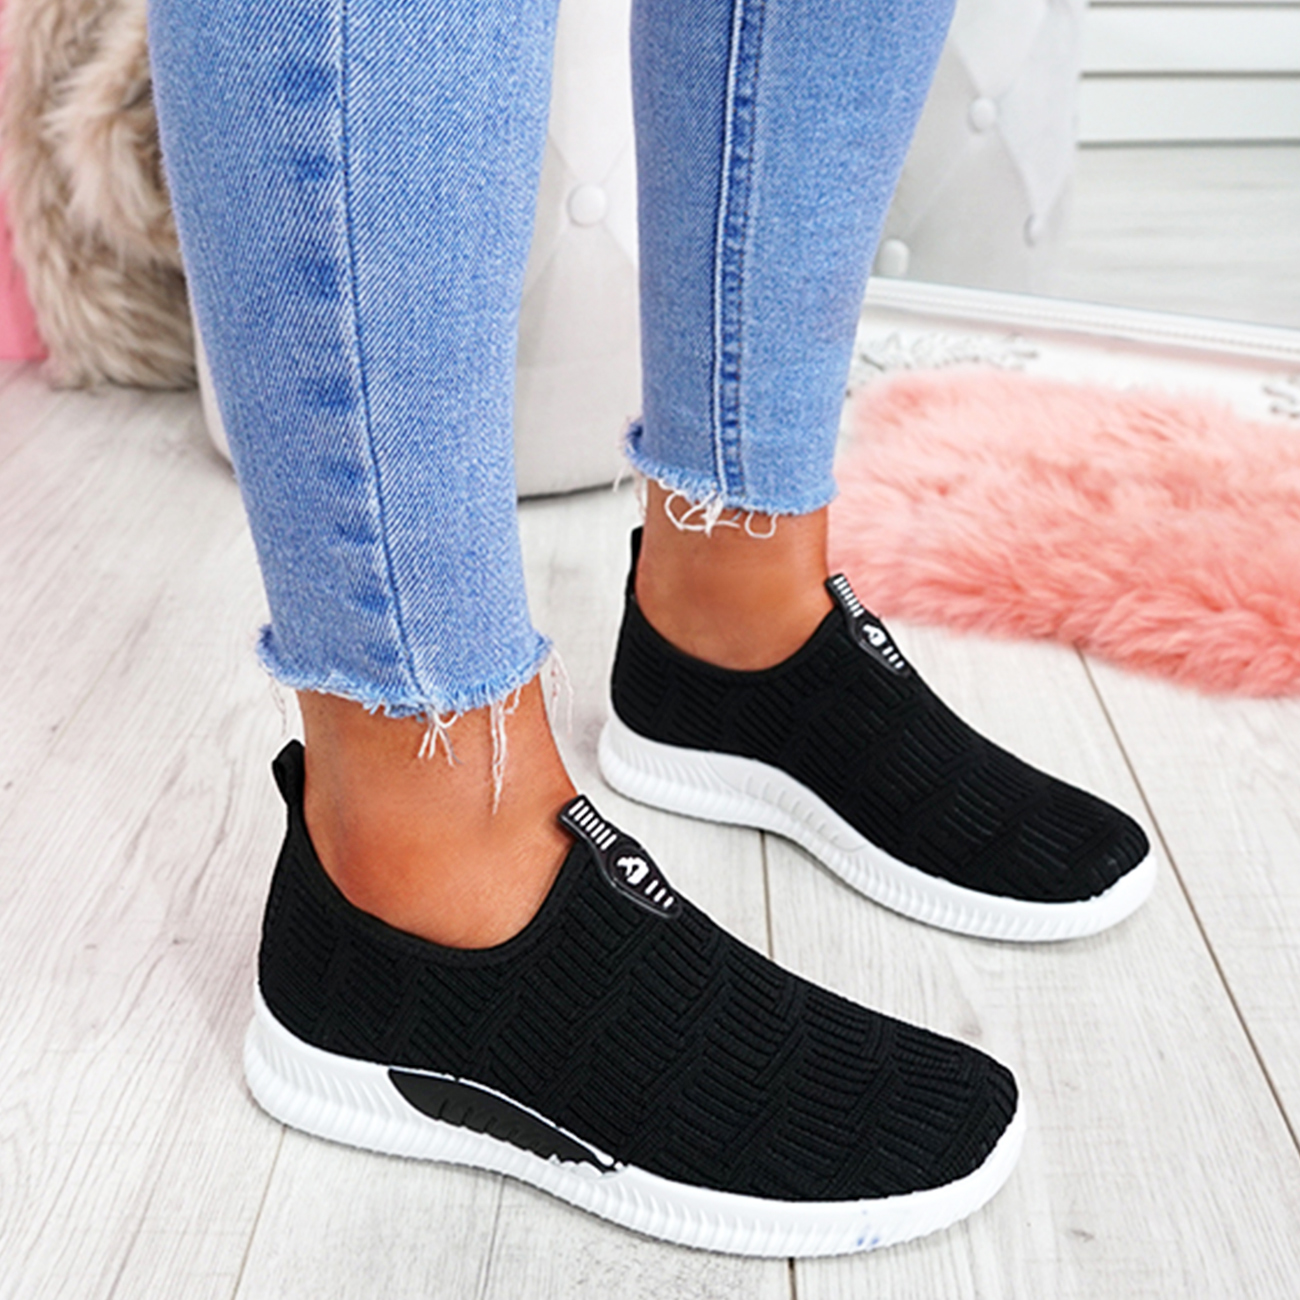 WOMENS LADIES KNIT SPORT TRAINERS SLIP ON RUNNING SNEAKERS WOMEN PARTY SHOES